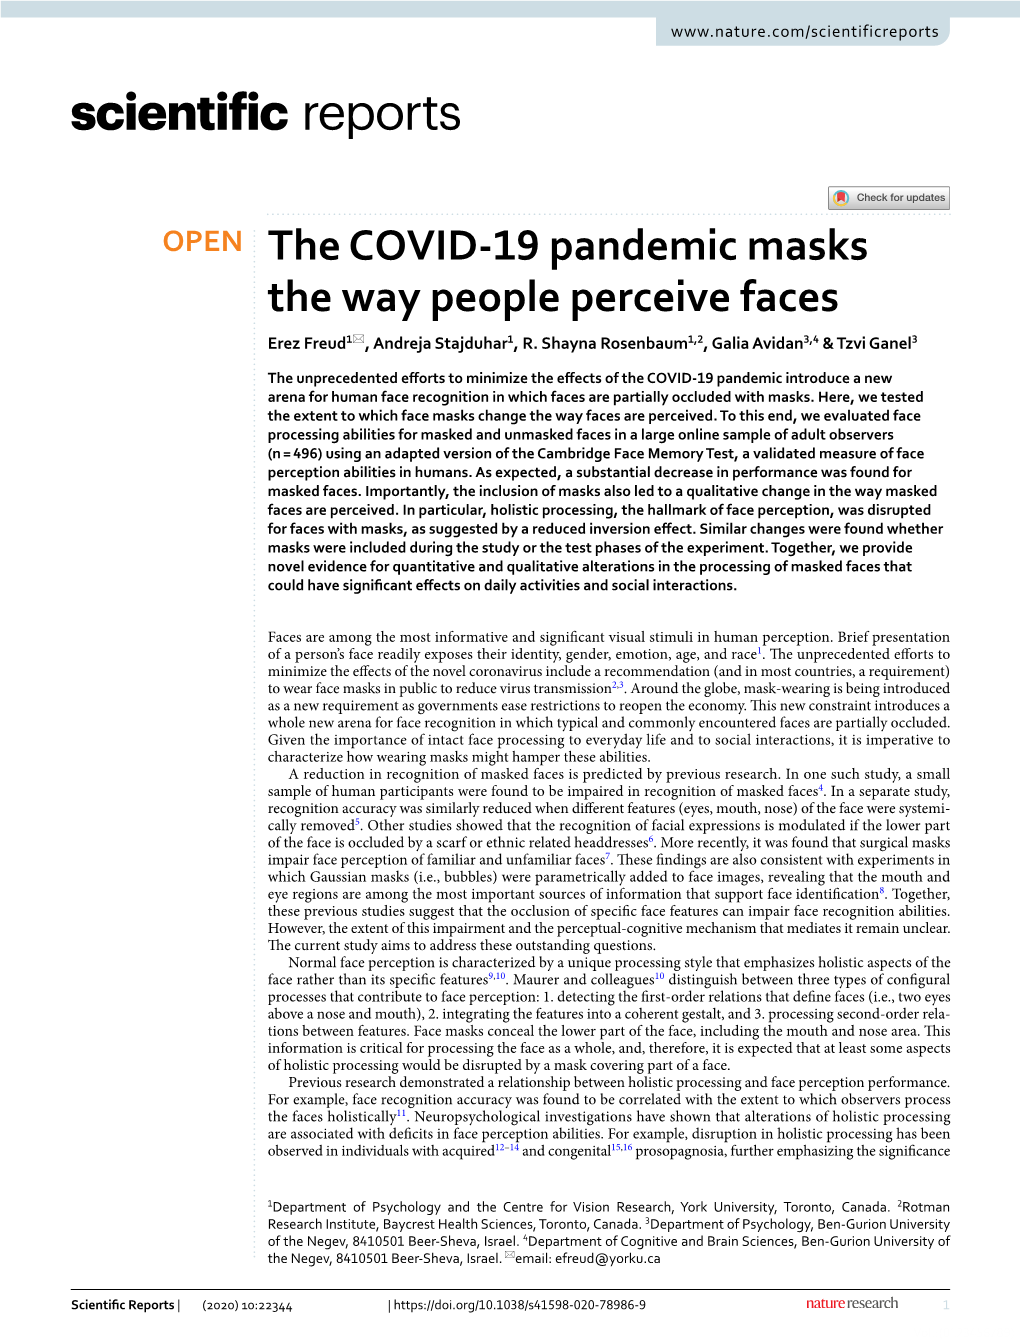 The COVID-19 Pandemic Masks the Way People Perceive Faces